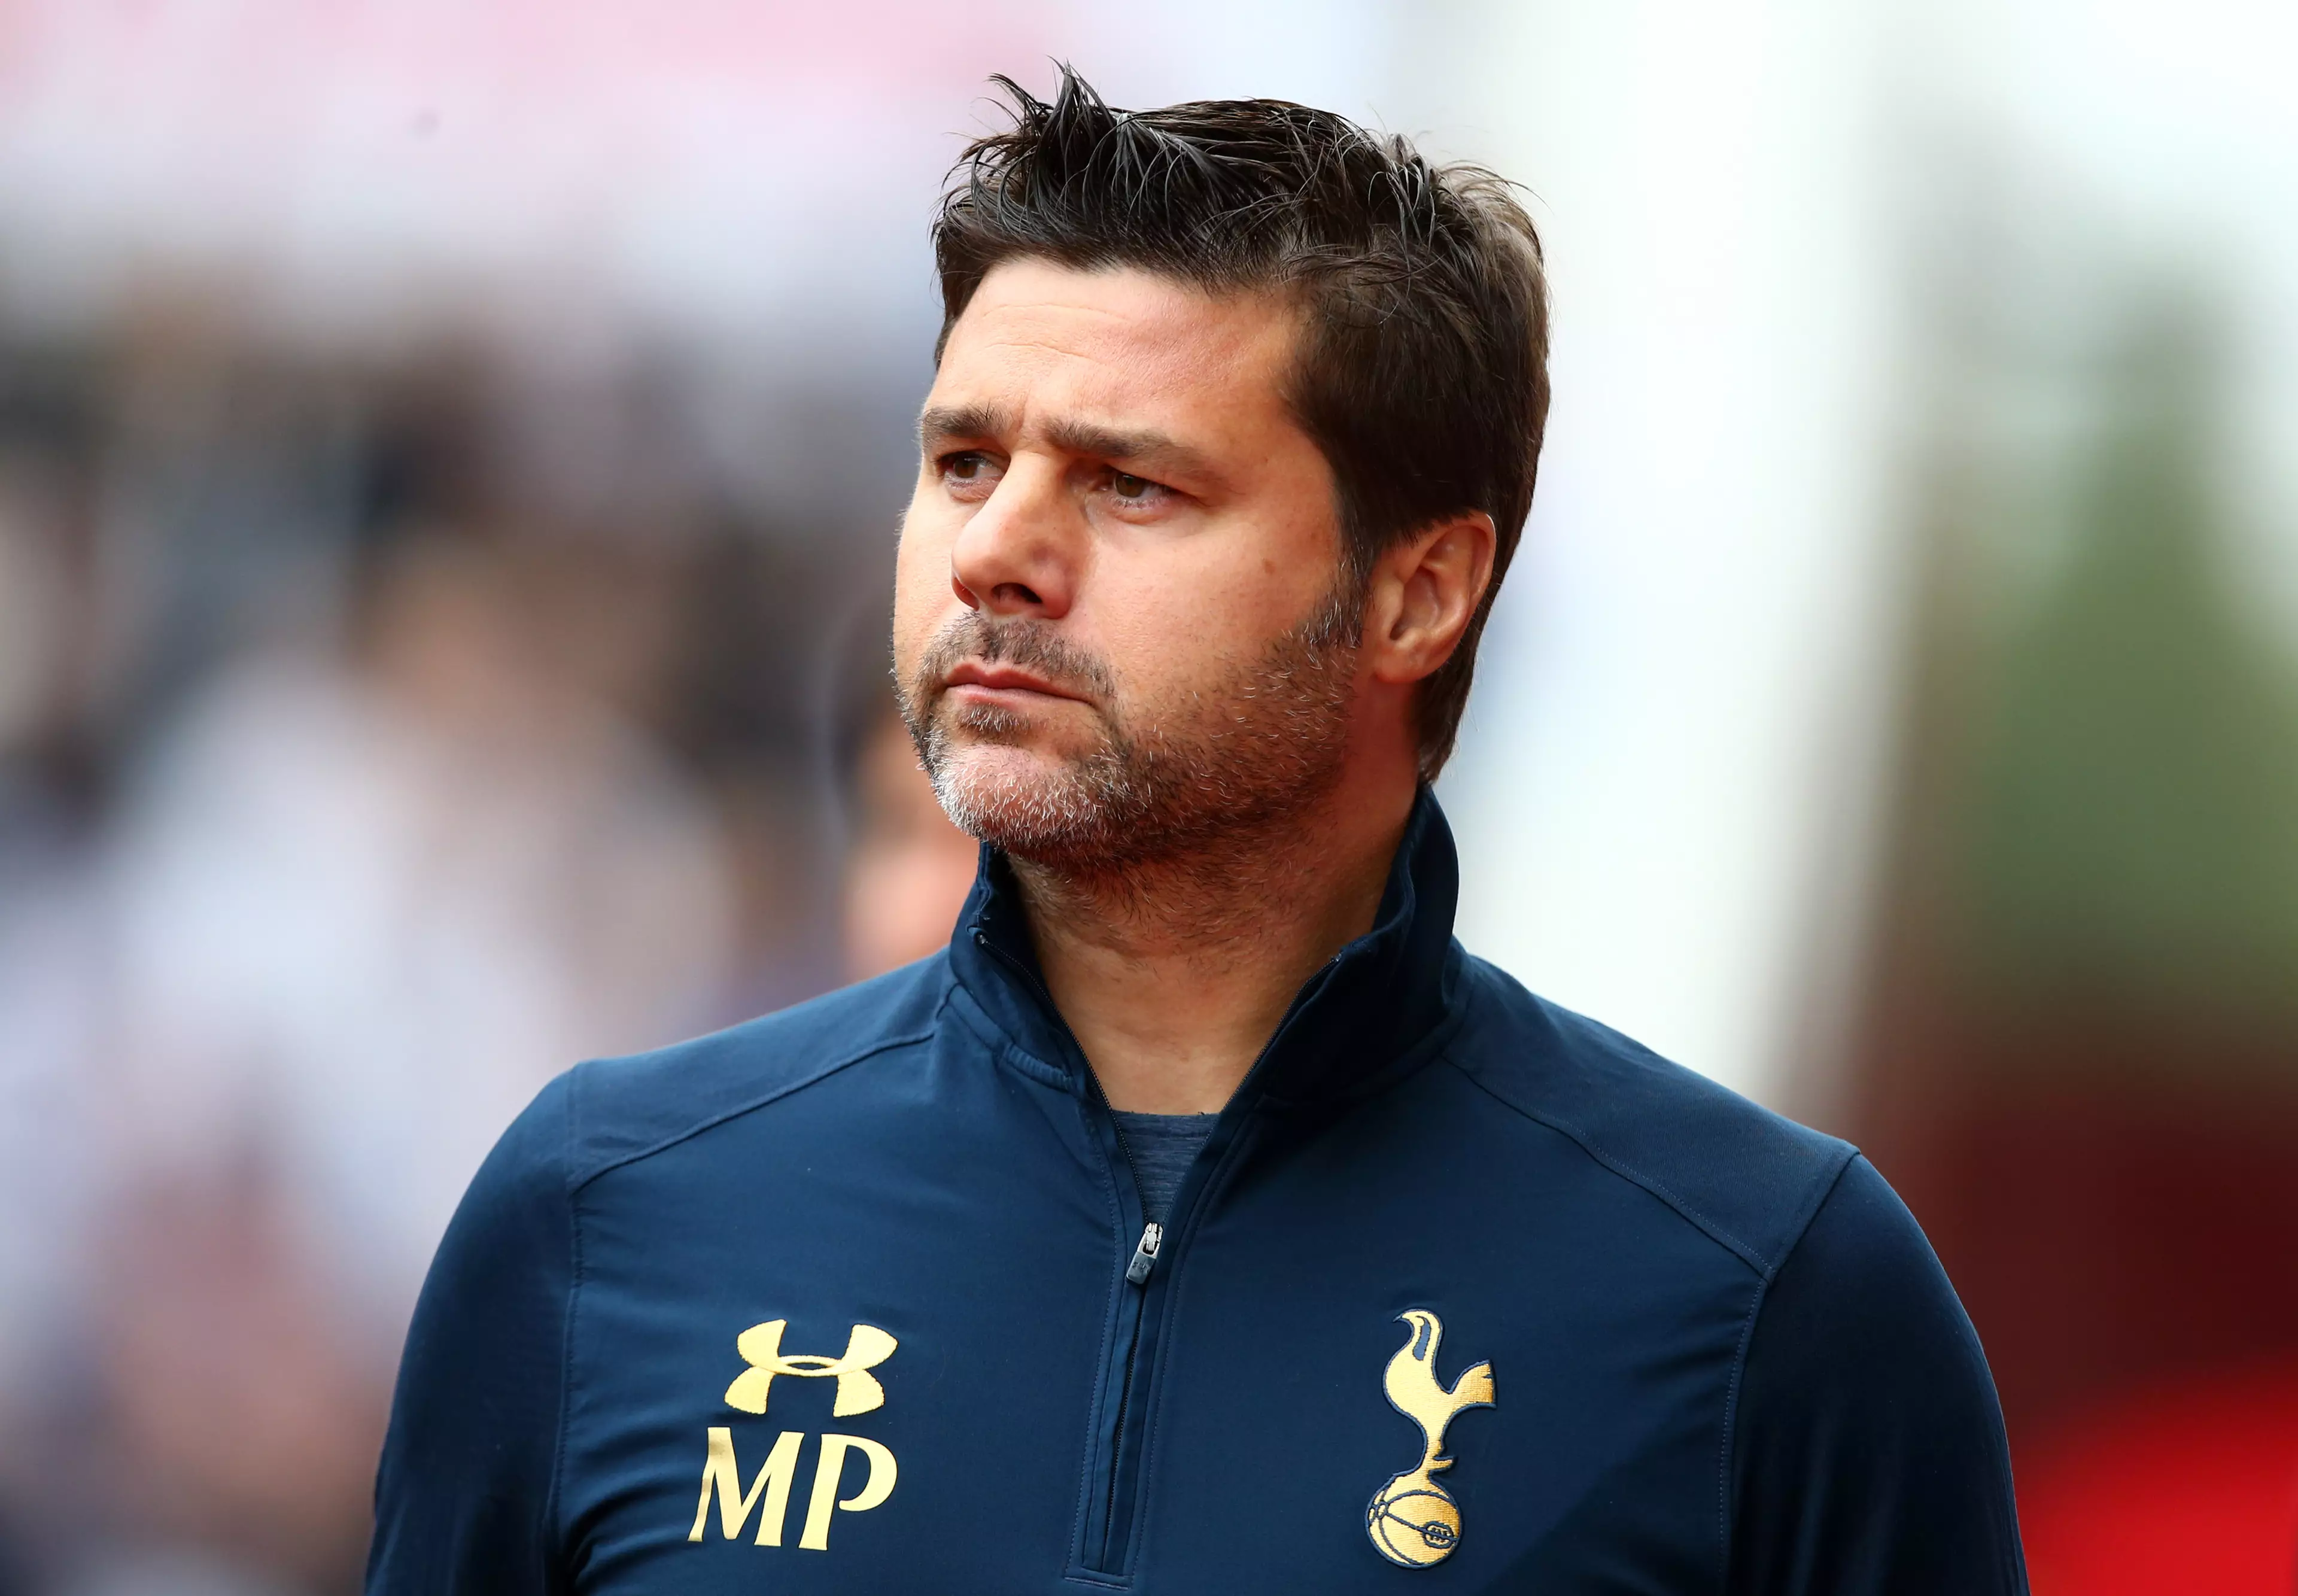 Will Pochettino regret signing his new deal now? Image: PA Images